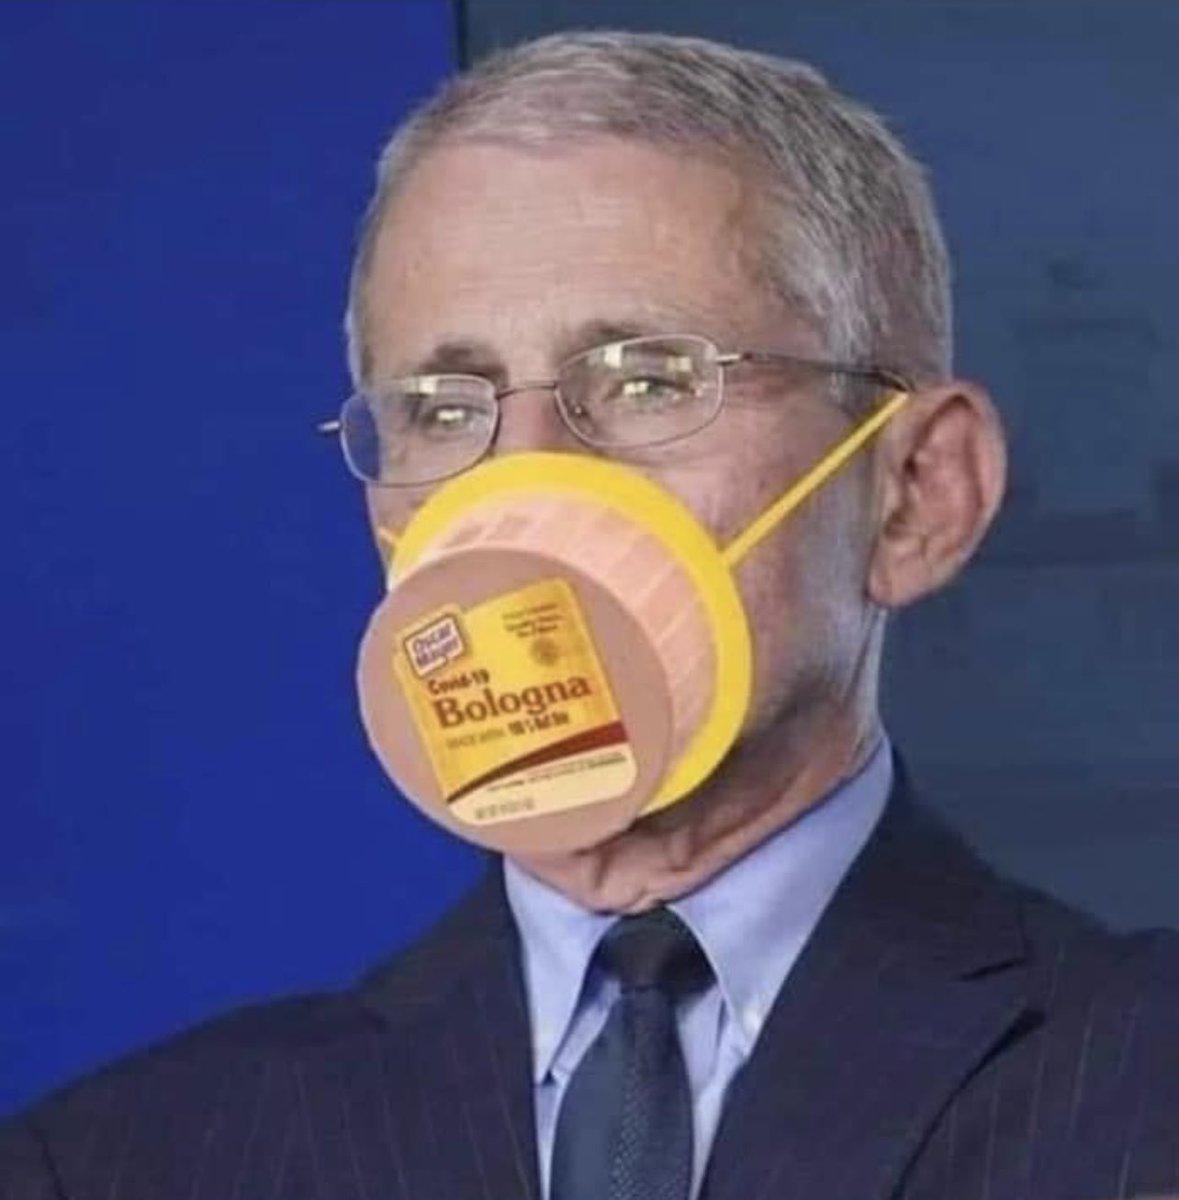 The New Fauci Mask.